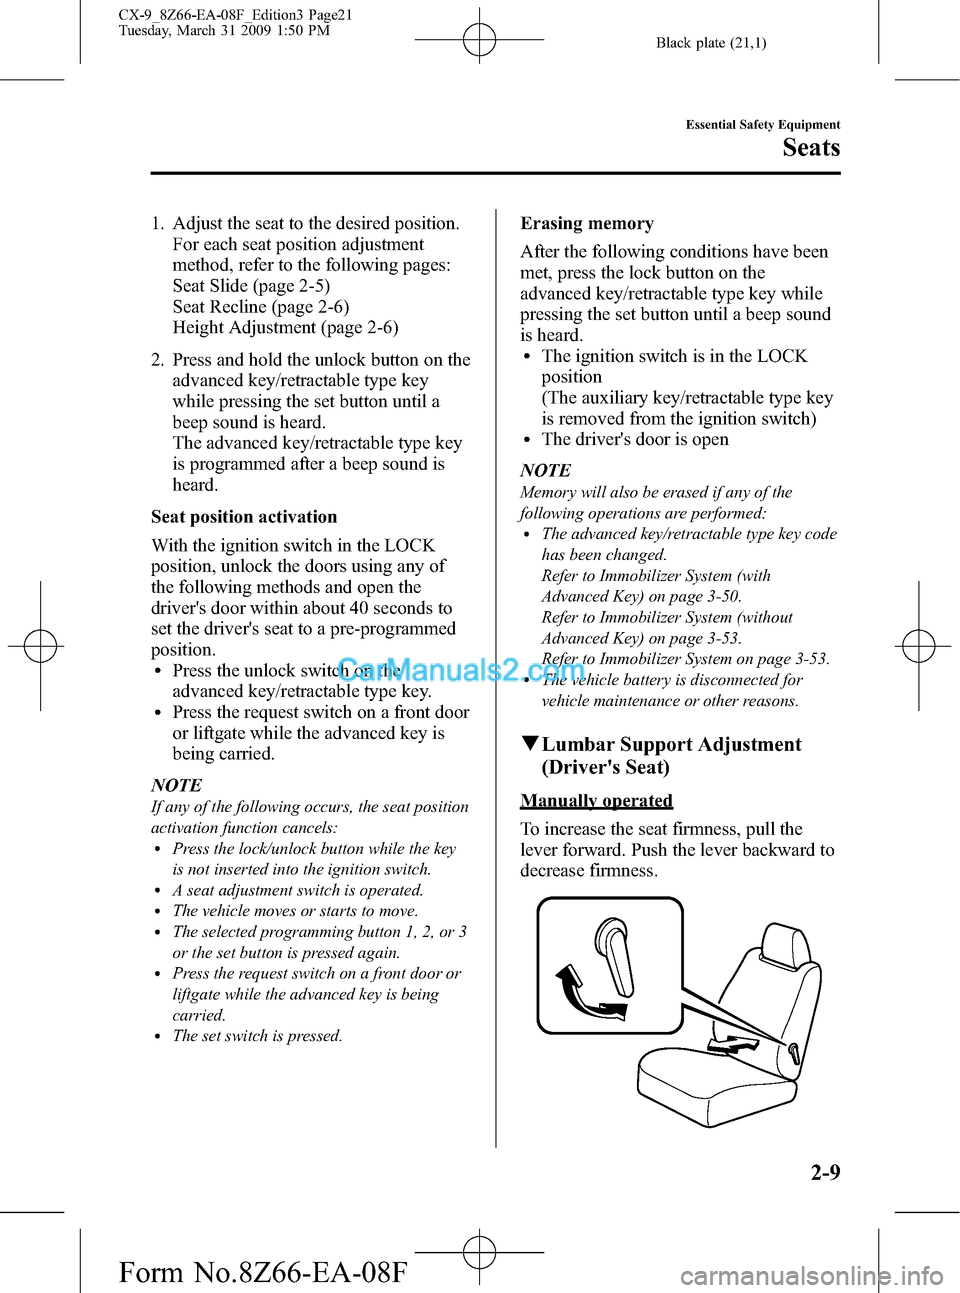 MAZDA MODEL CX-9 2009  Owners Manual (in English) Black plate (21,1)
1. Adjust the seat to the desired position.
For each seat position adjustment
method, refer to the following pages:
Seat Slide (page 2-5)
Seat Recline (page 2-6)
Height Adjustment (